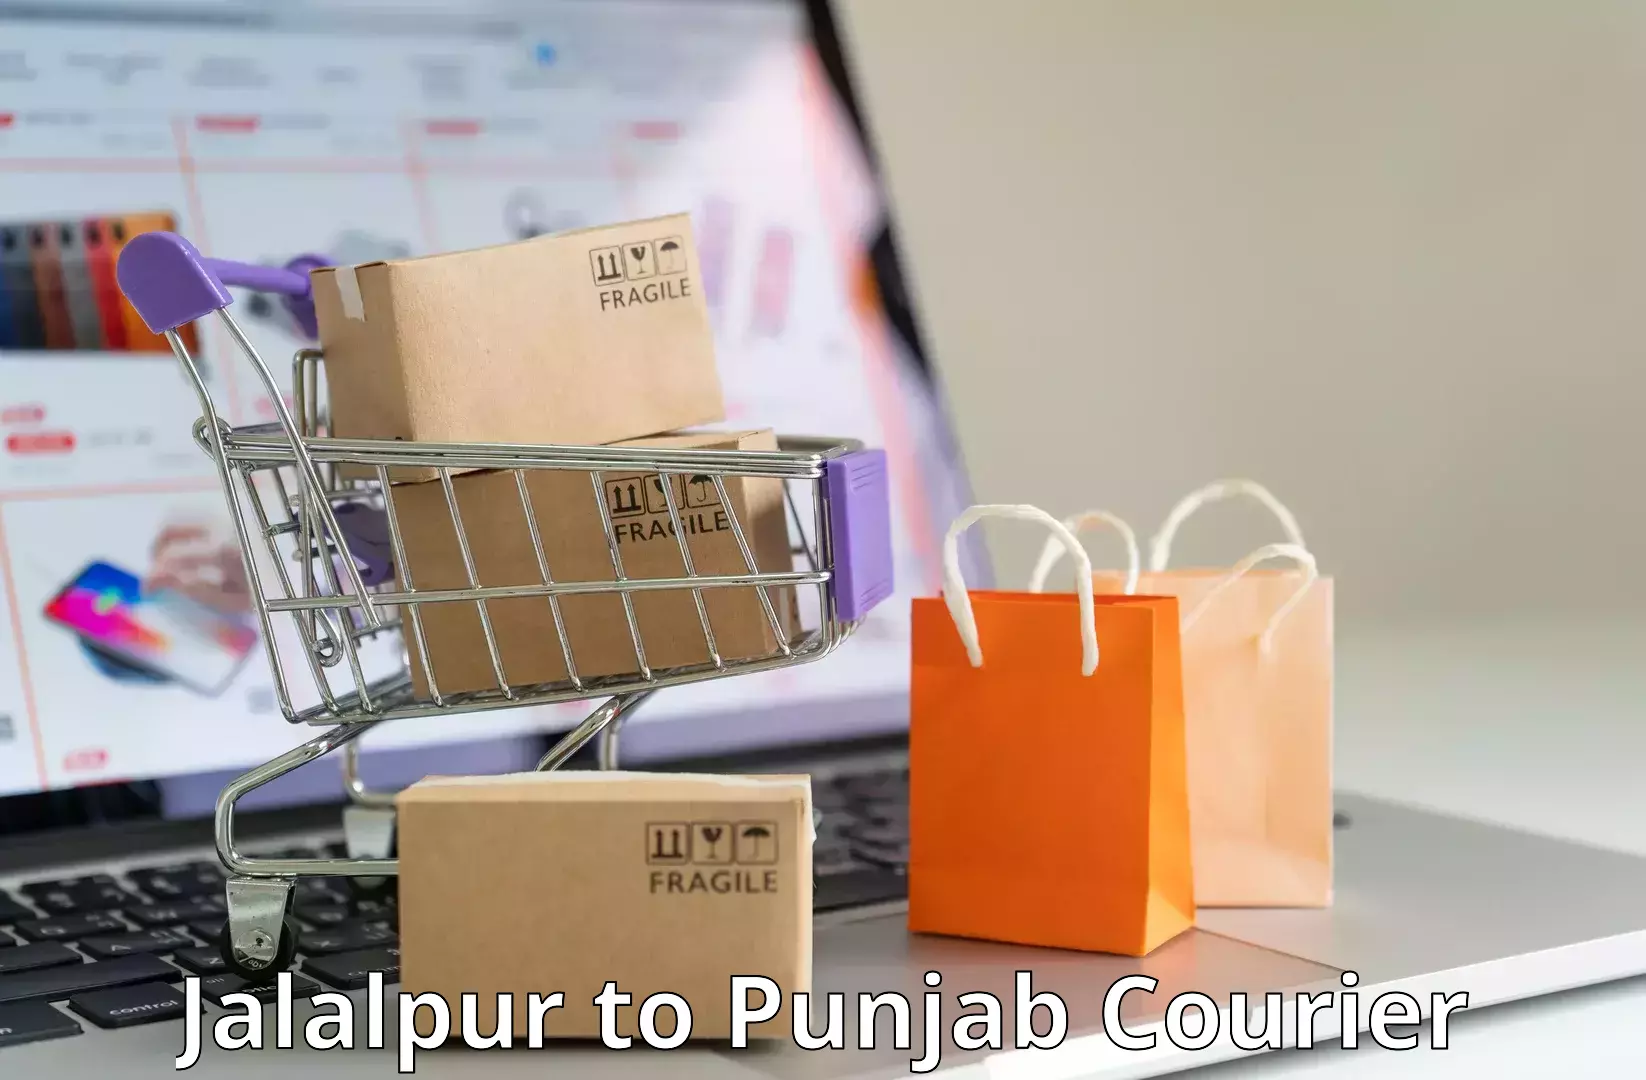 Small parcel delivery Jalalpur to Batala